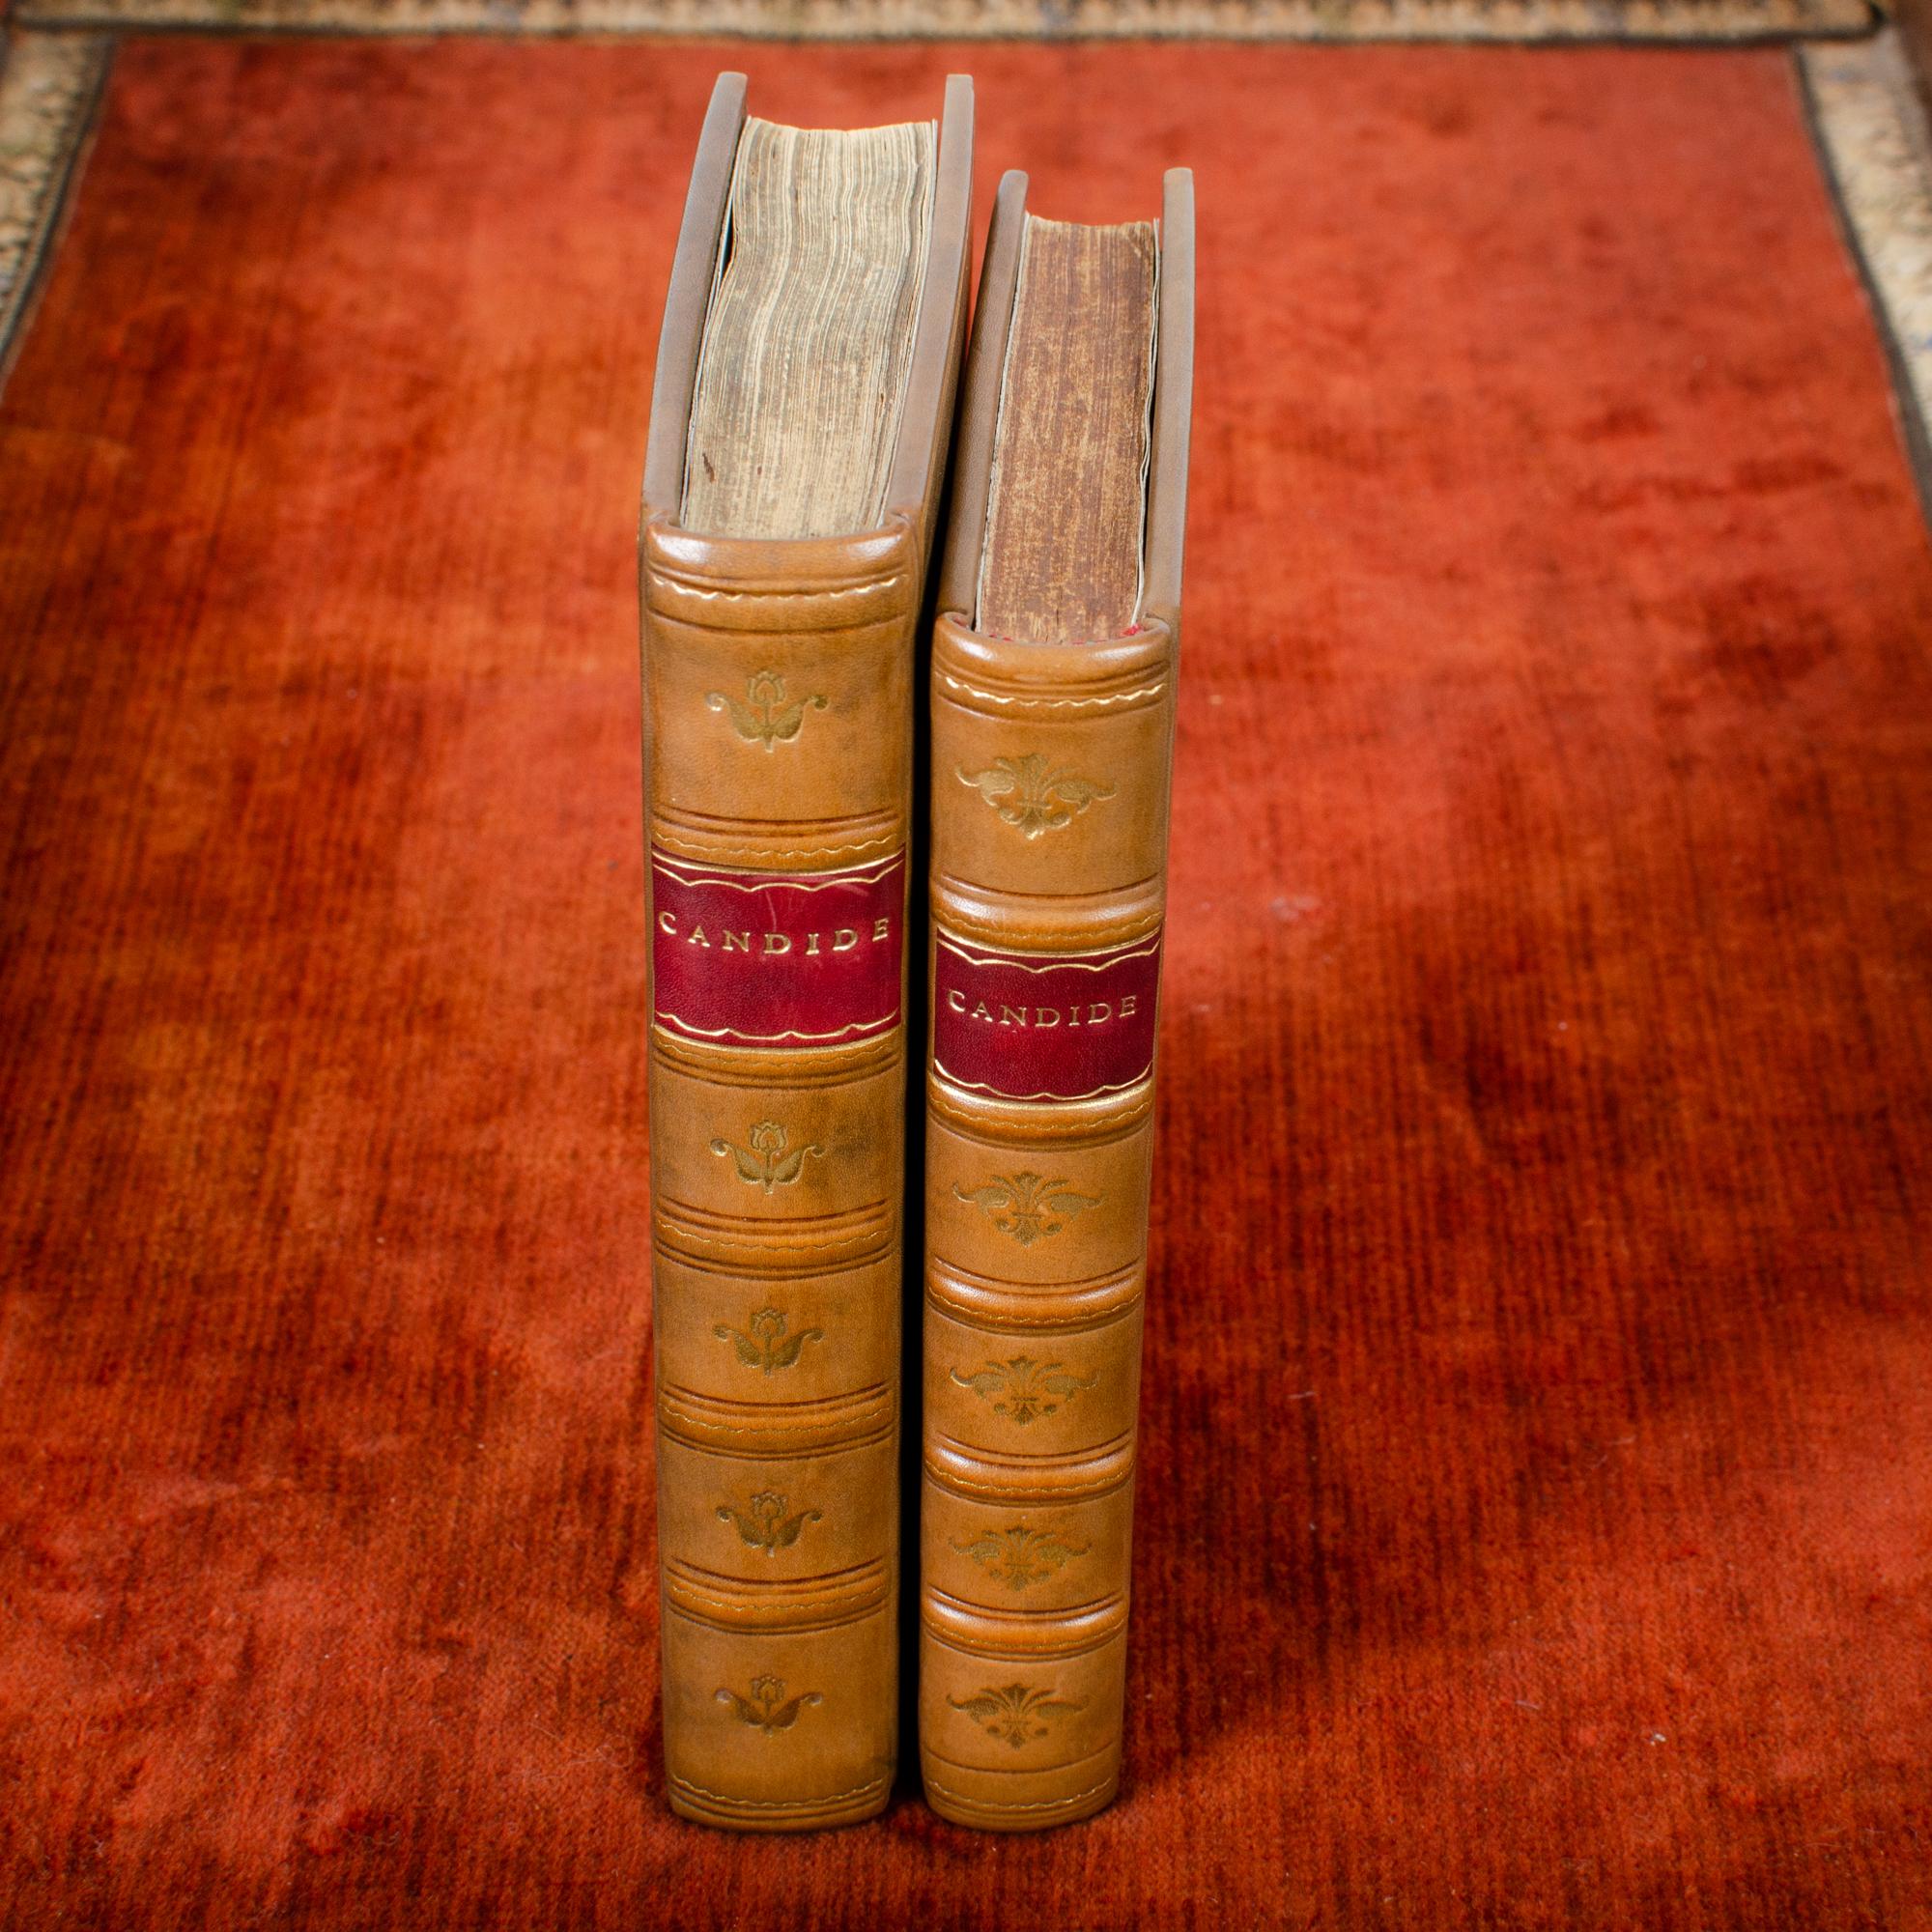 Swiss Voltaire's Candide True First Edition & First London Edition For Sale